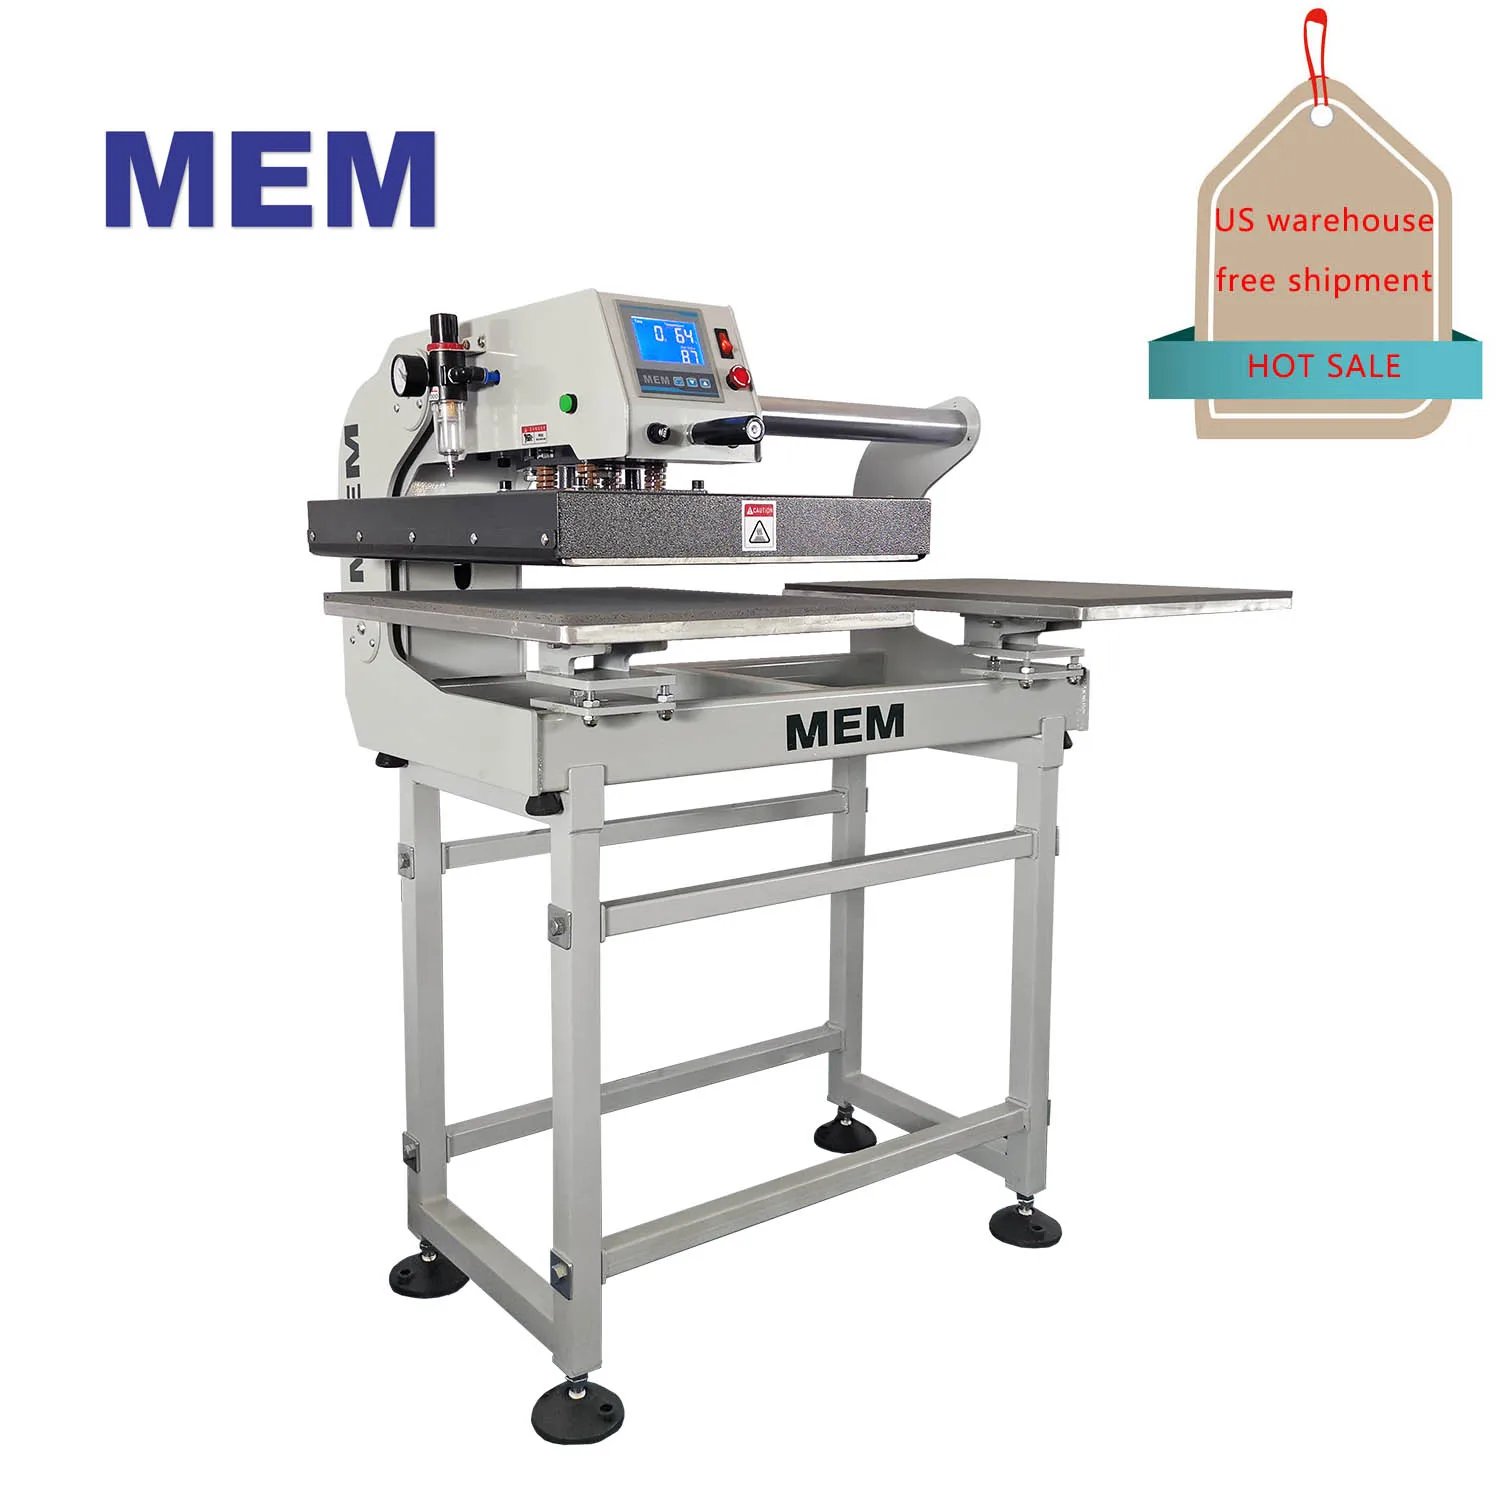 

MEM pneumatic T shirt heat transfer sublimation machine for 40*50 cm 16"*20" double work plate delivery from US warehouse